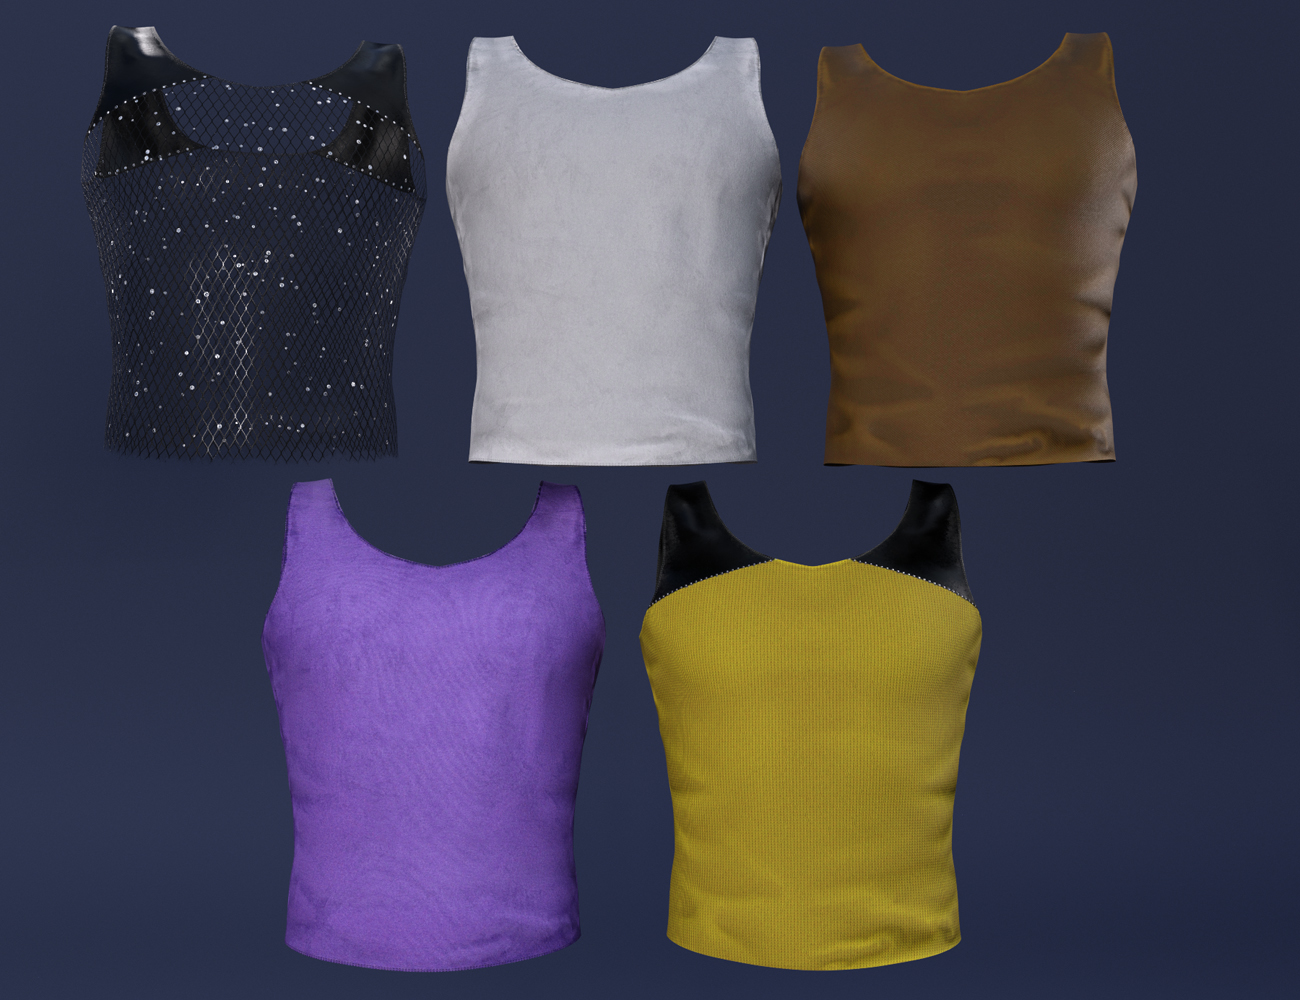 Shadow Realm Tank Top for Genesis 8 and 8.1 Males